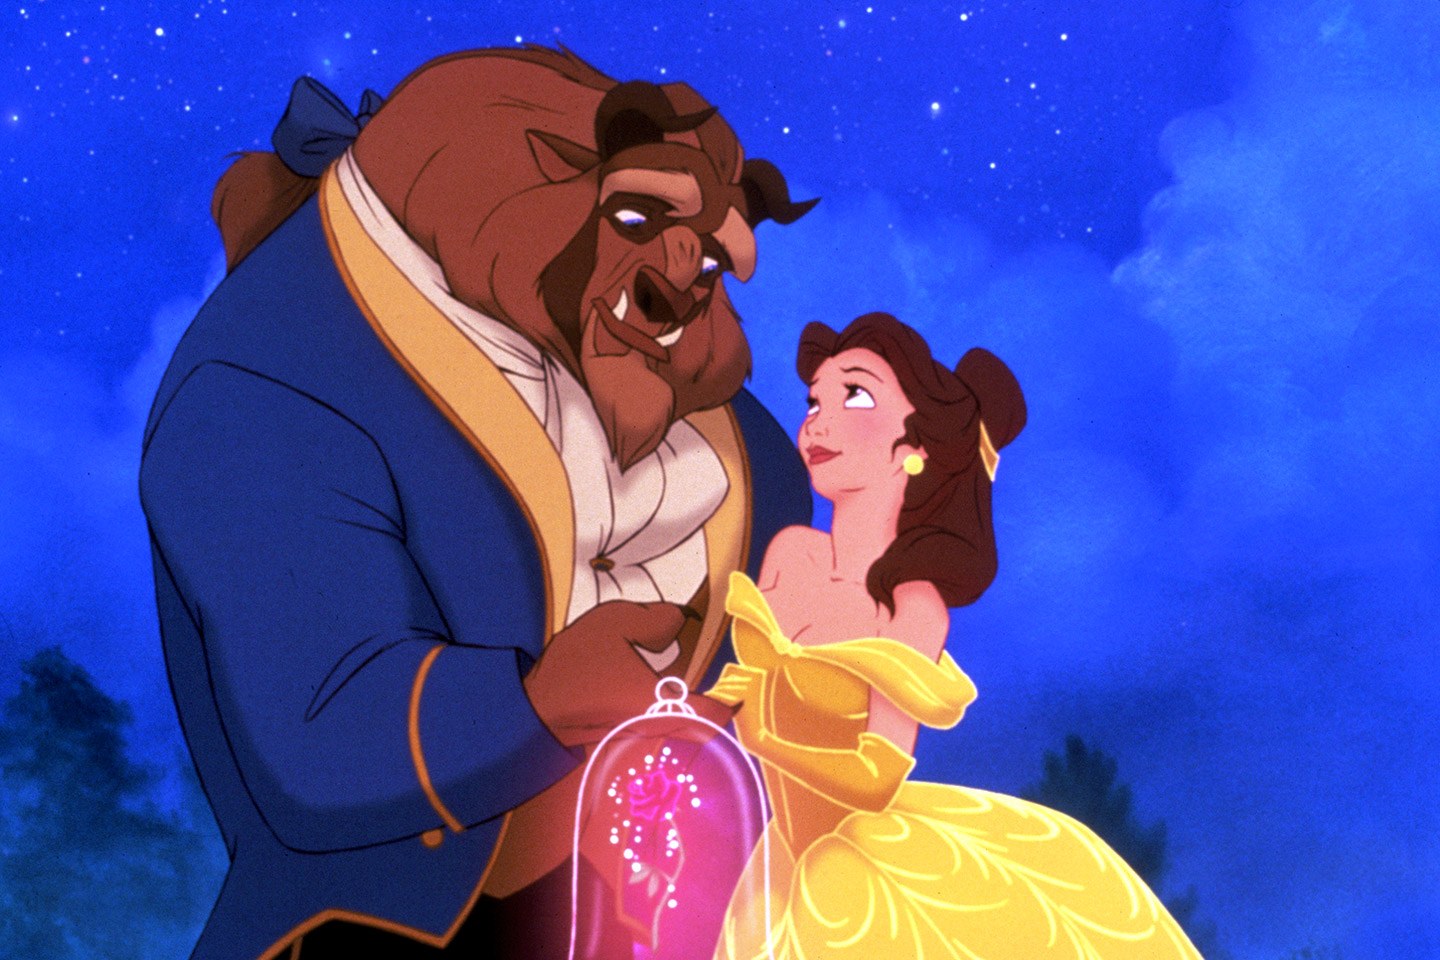 Episode #181 - Beauty and the Beast.